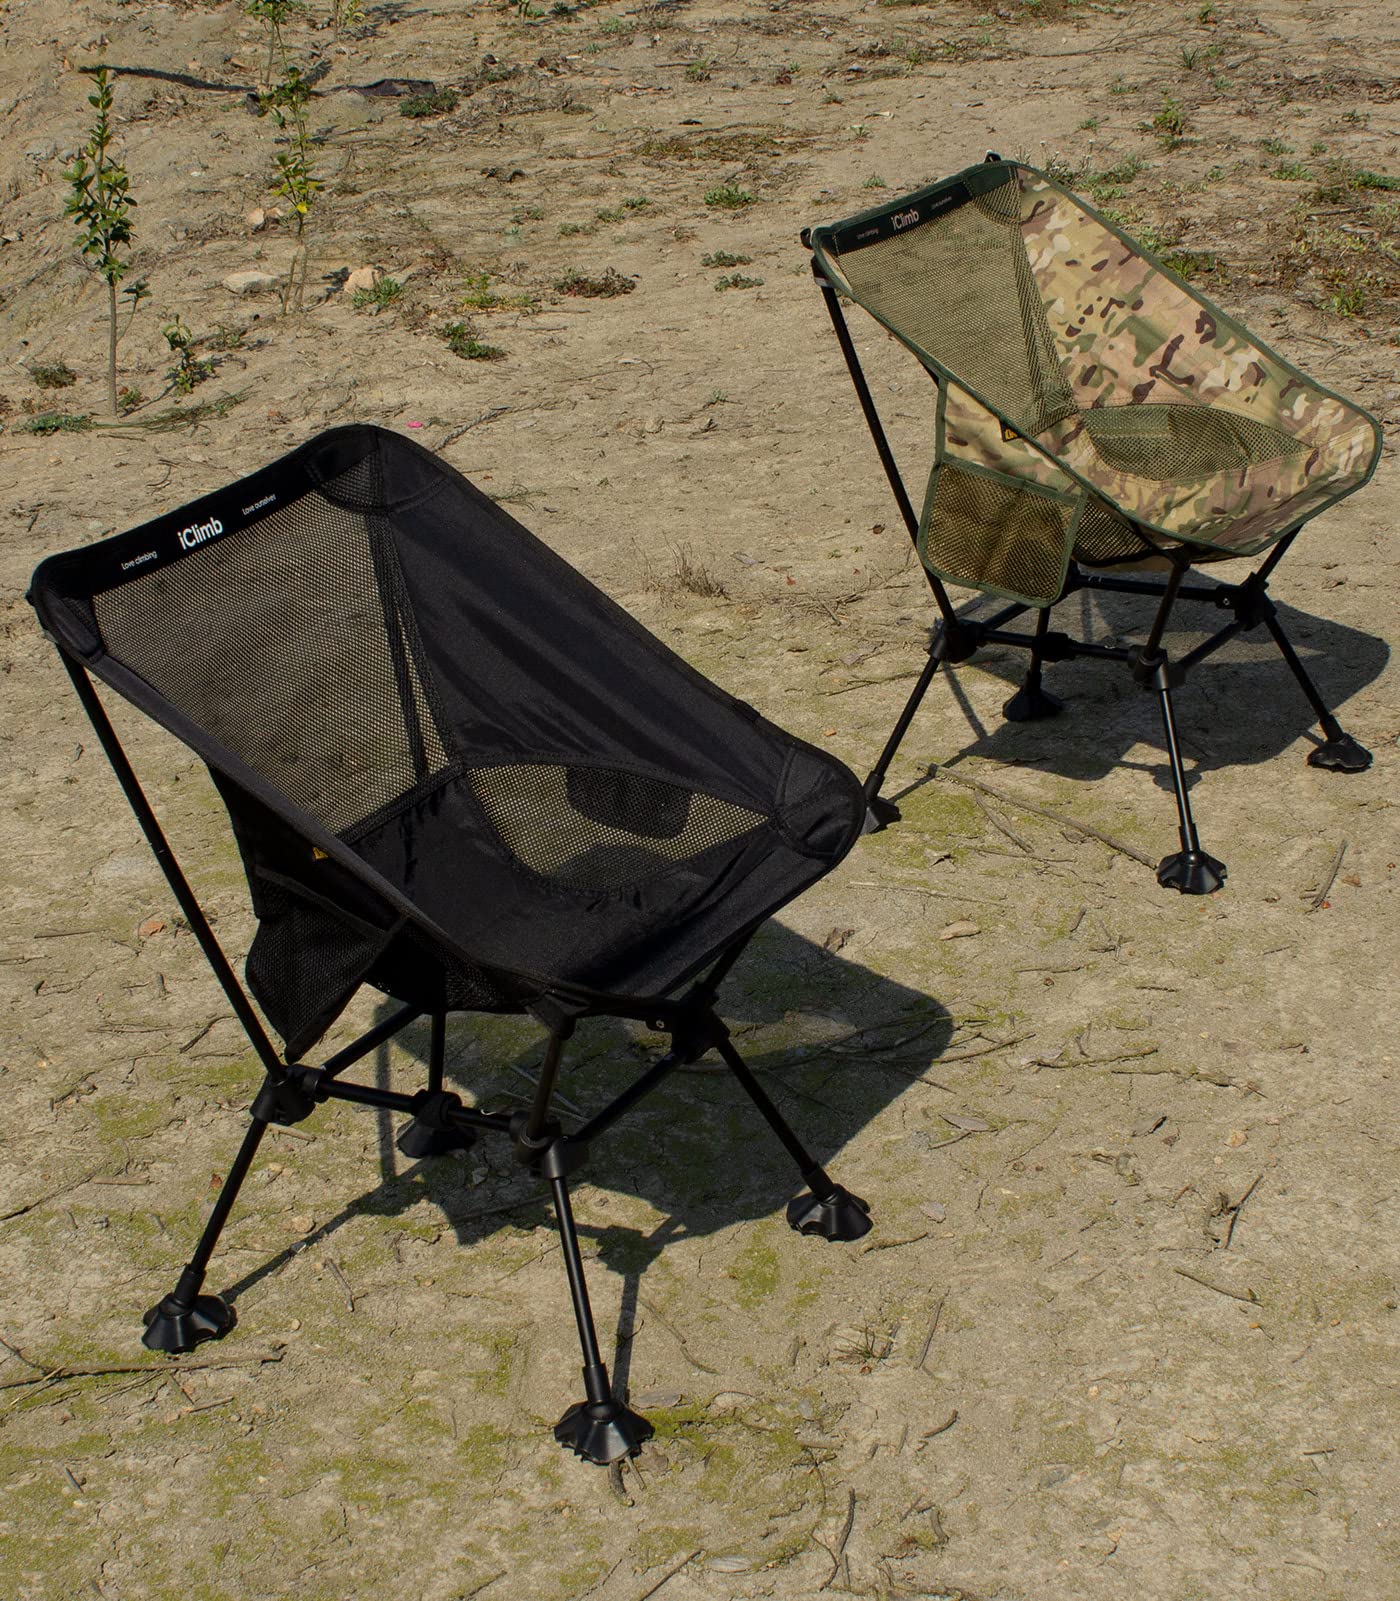 iClimb Ultralight Compact Camping Folding Beach Chair with Anti-Sinking Large Feet and Back Support Webbing (Black - Square Frame)